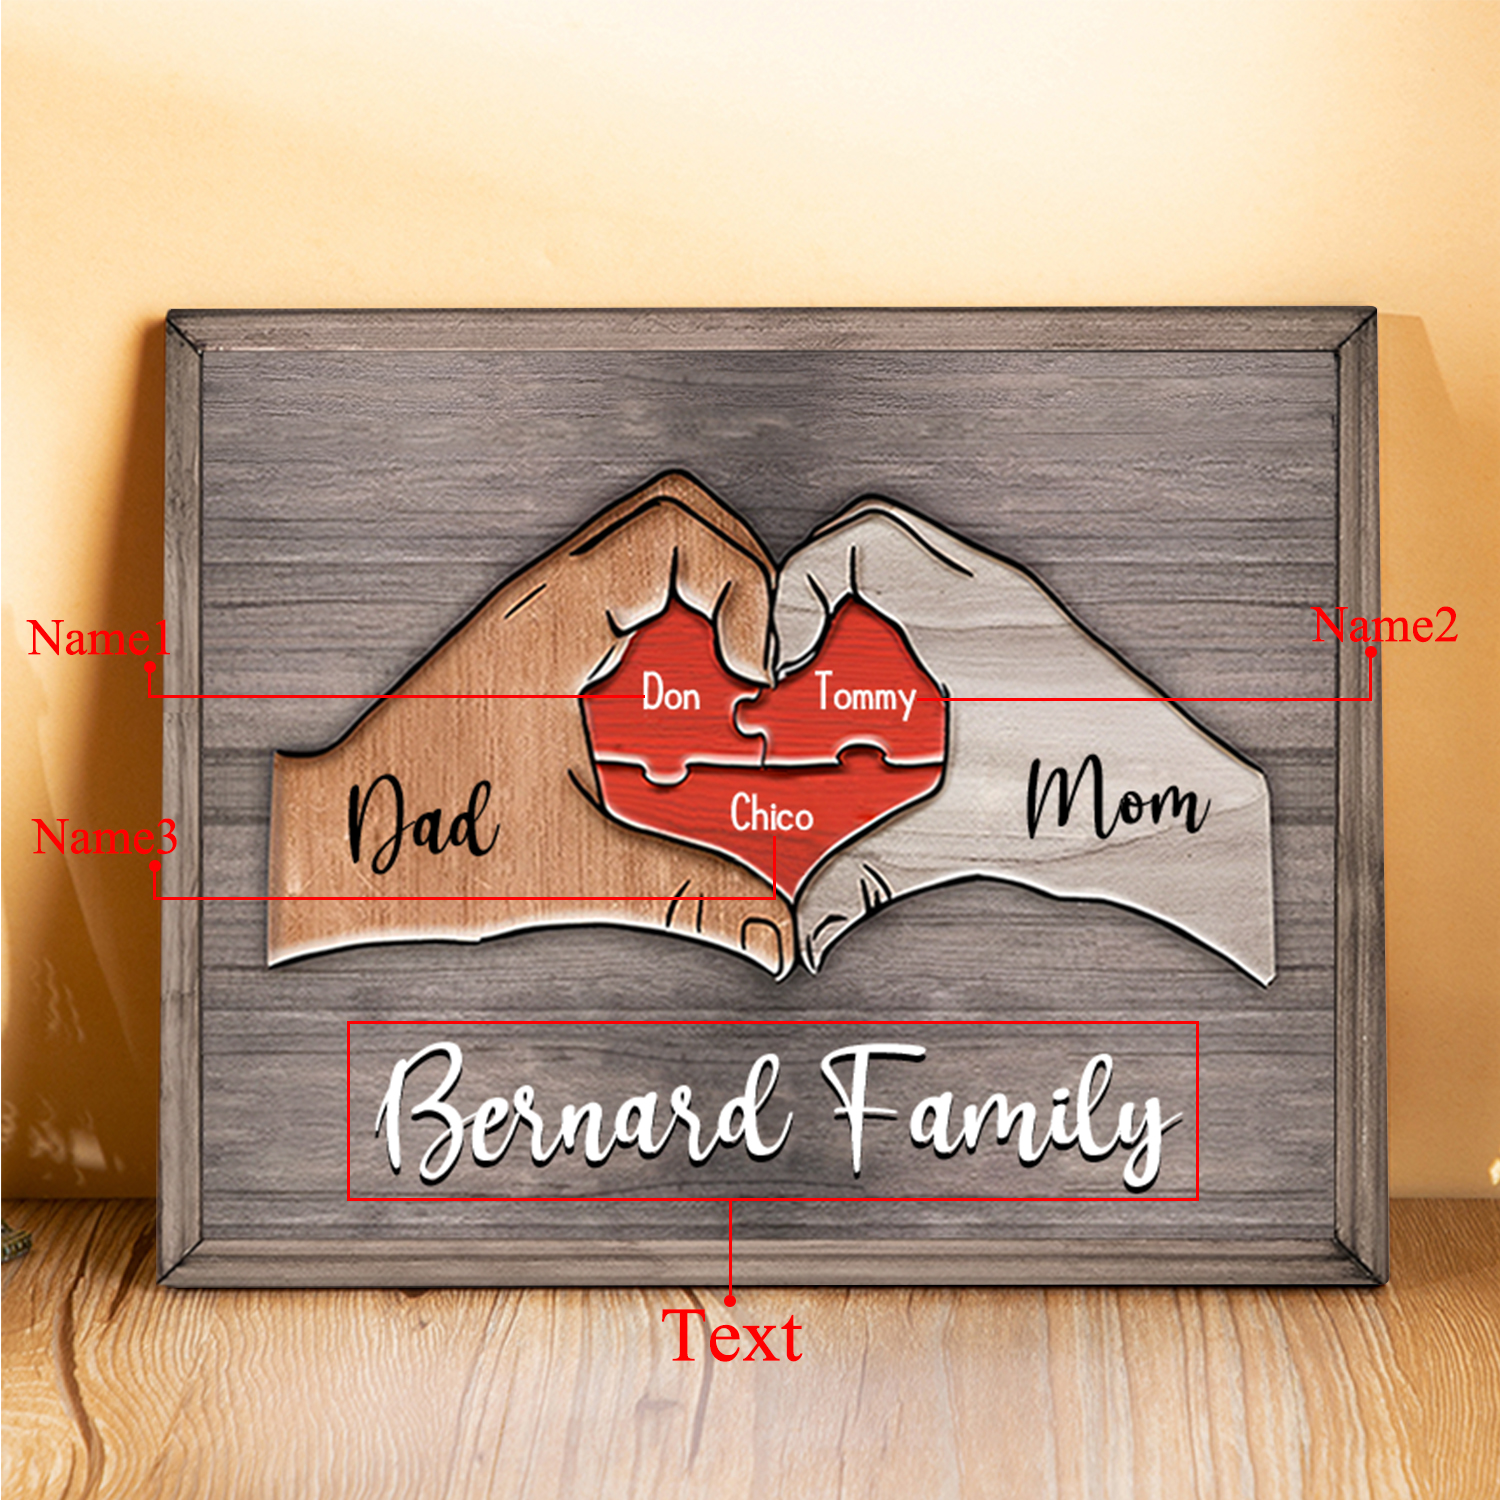 3 Names - Personalized Love Heart Customized Name and Text Wooden Ornament Father's Day Gift for Dad